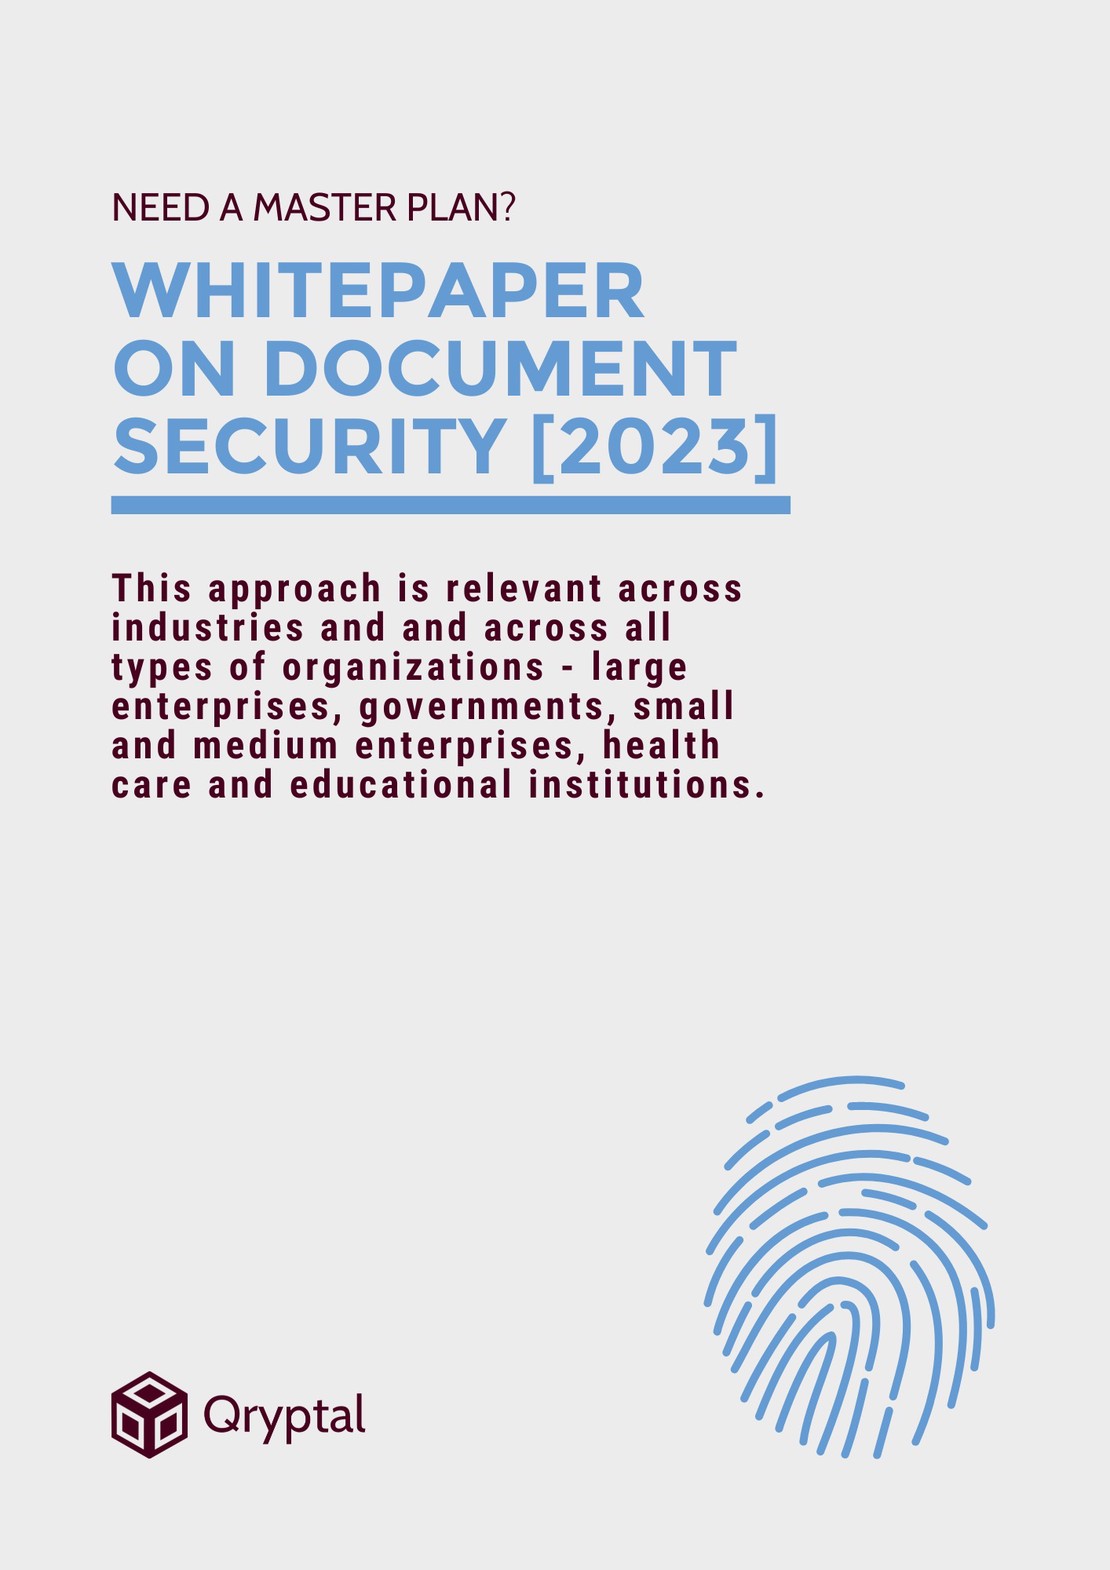 New Whitepaper on Document Security Now Available for Download